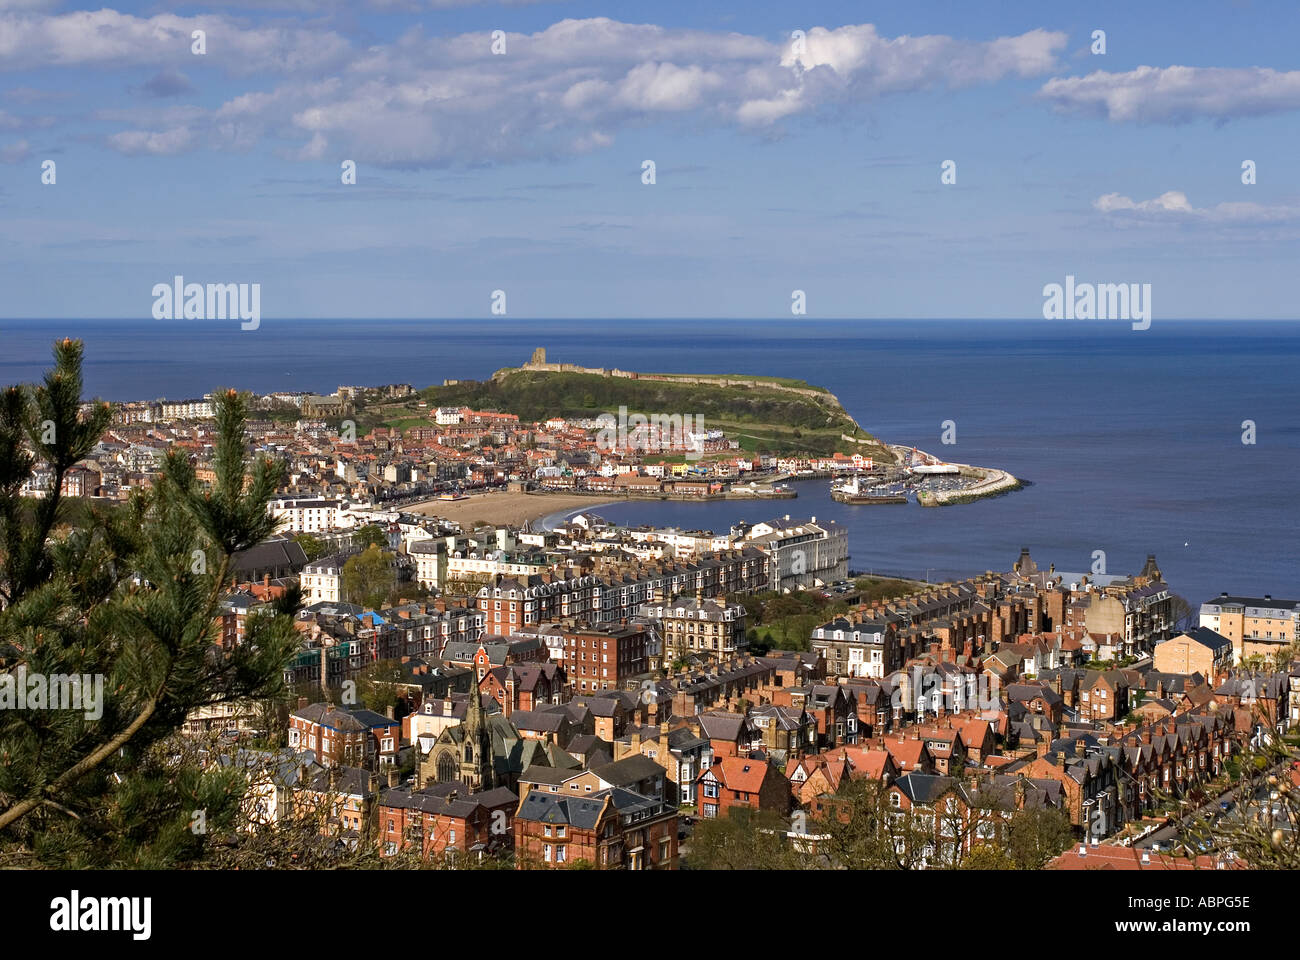 Page 2 - Olivers Mount Scarborough High Resolution Stock Photography and  Images - Alamy